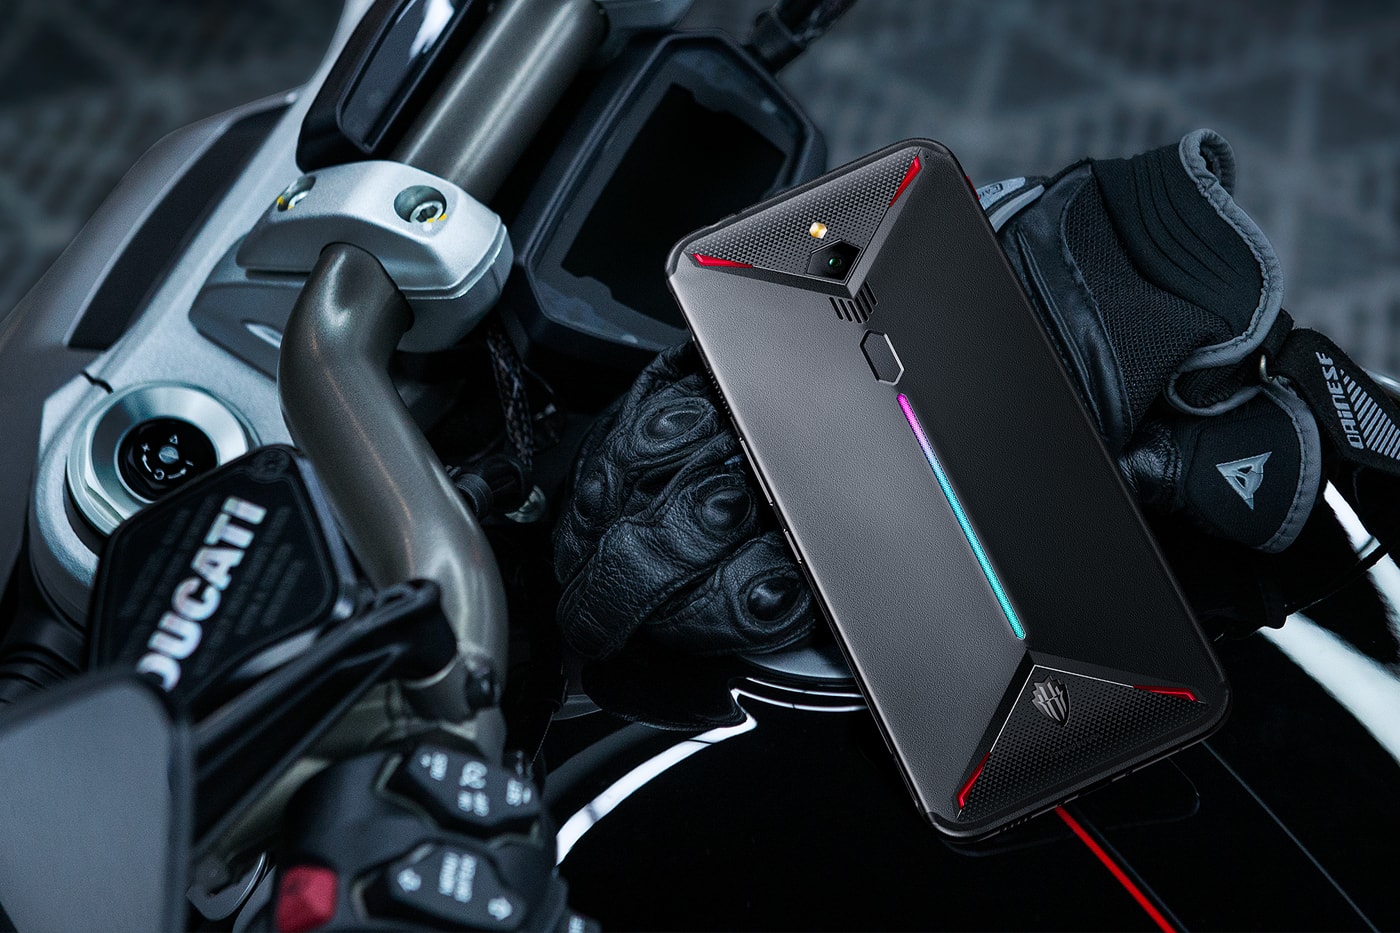 Nubia Red Magic 3 Gaming Phone Release Info video mobile games app apps android 9 smartphone  